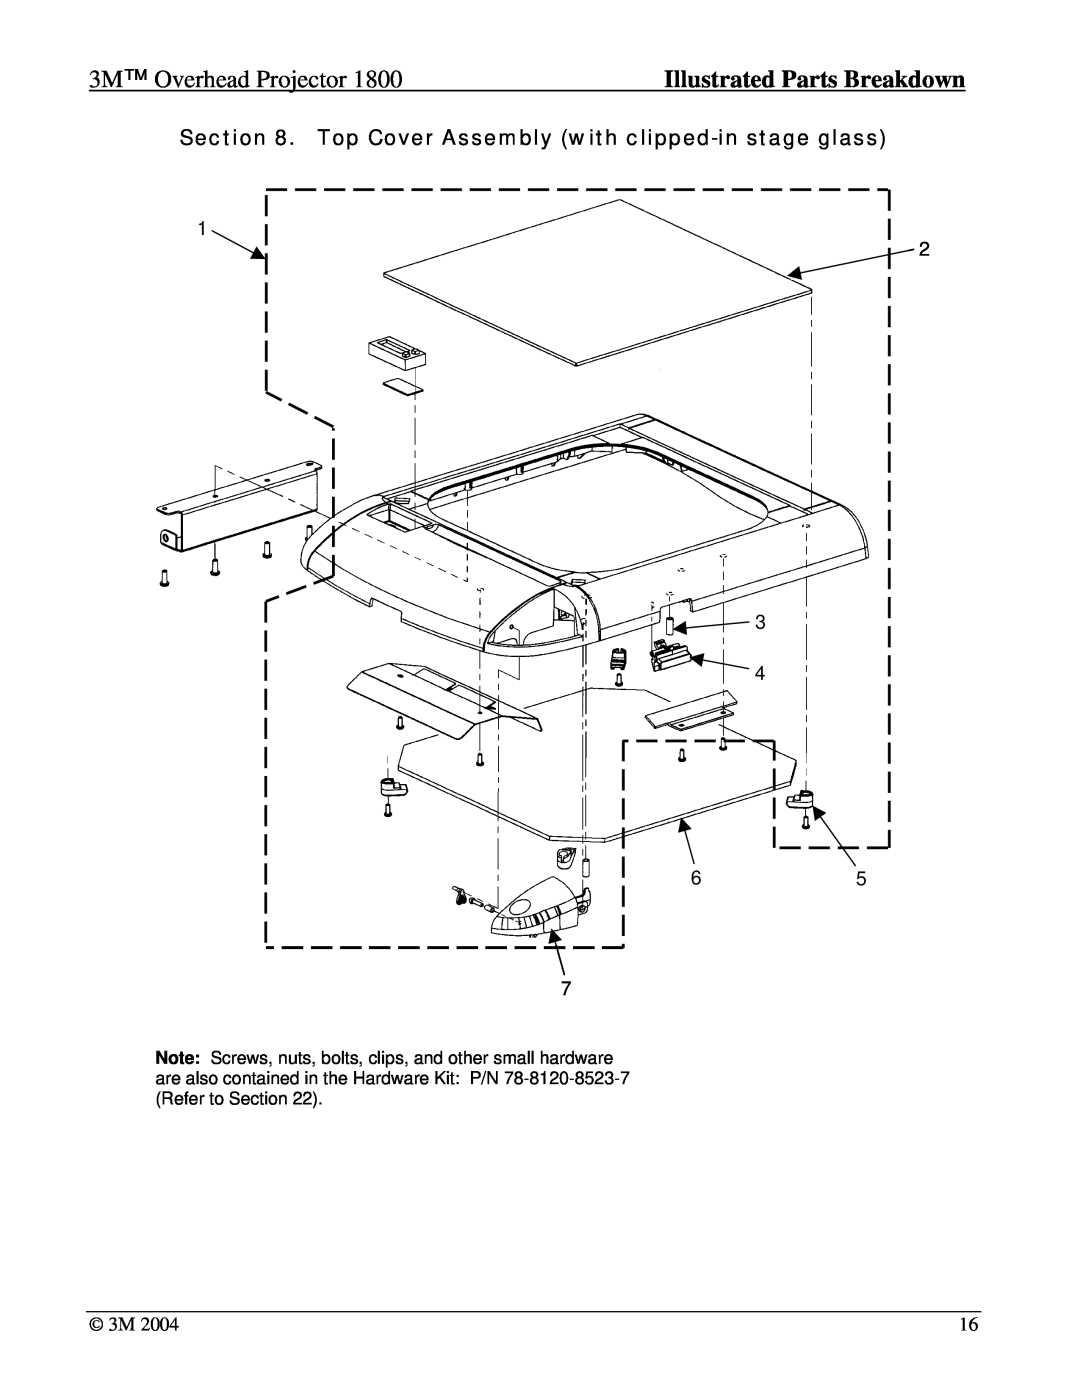 3M 1800 manual Top Cover Assembly with clipped-in stage glass, 3M Overhead Projector, Illustrated Parts Breakdown 